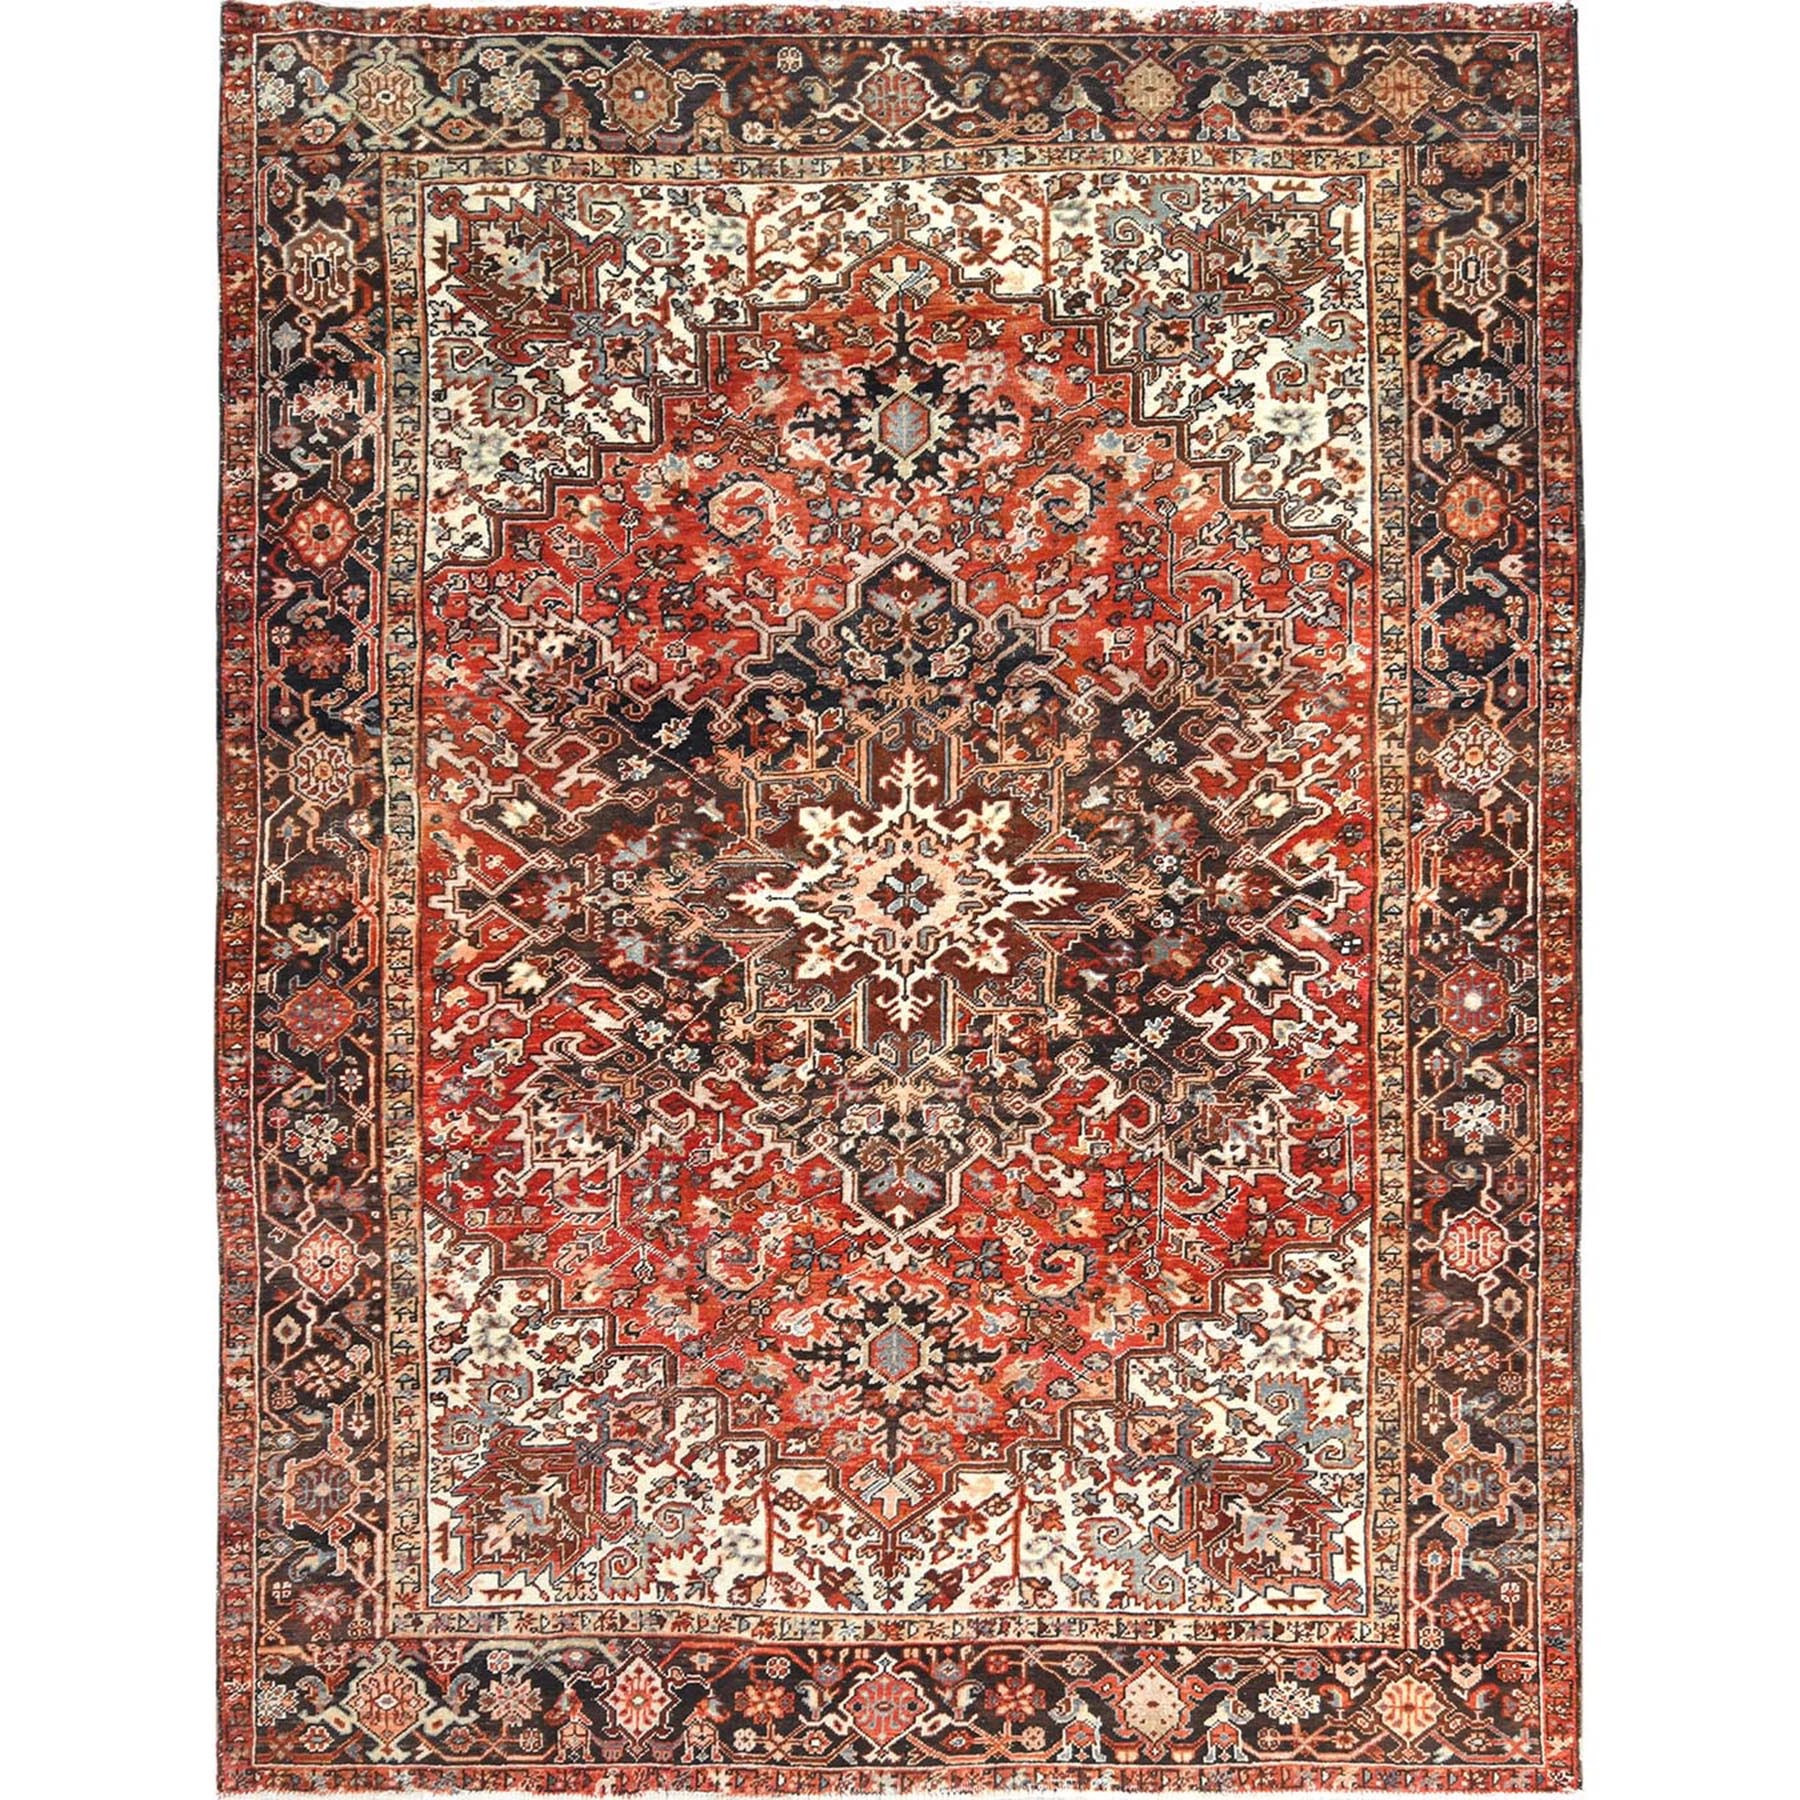  Wool Hand-Knotted Area Rug 8'5